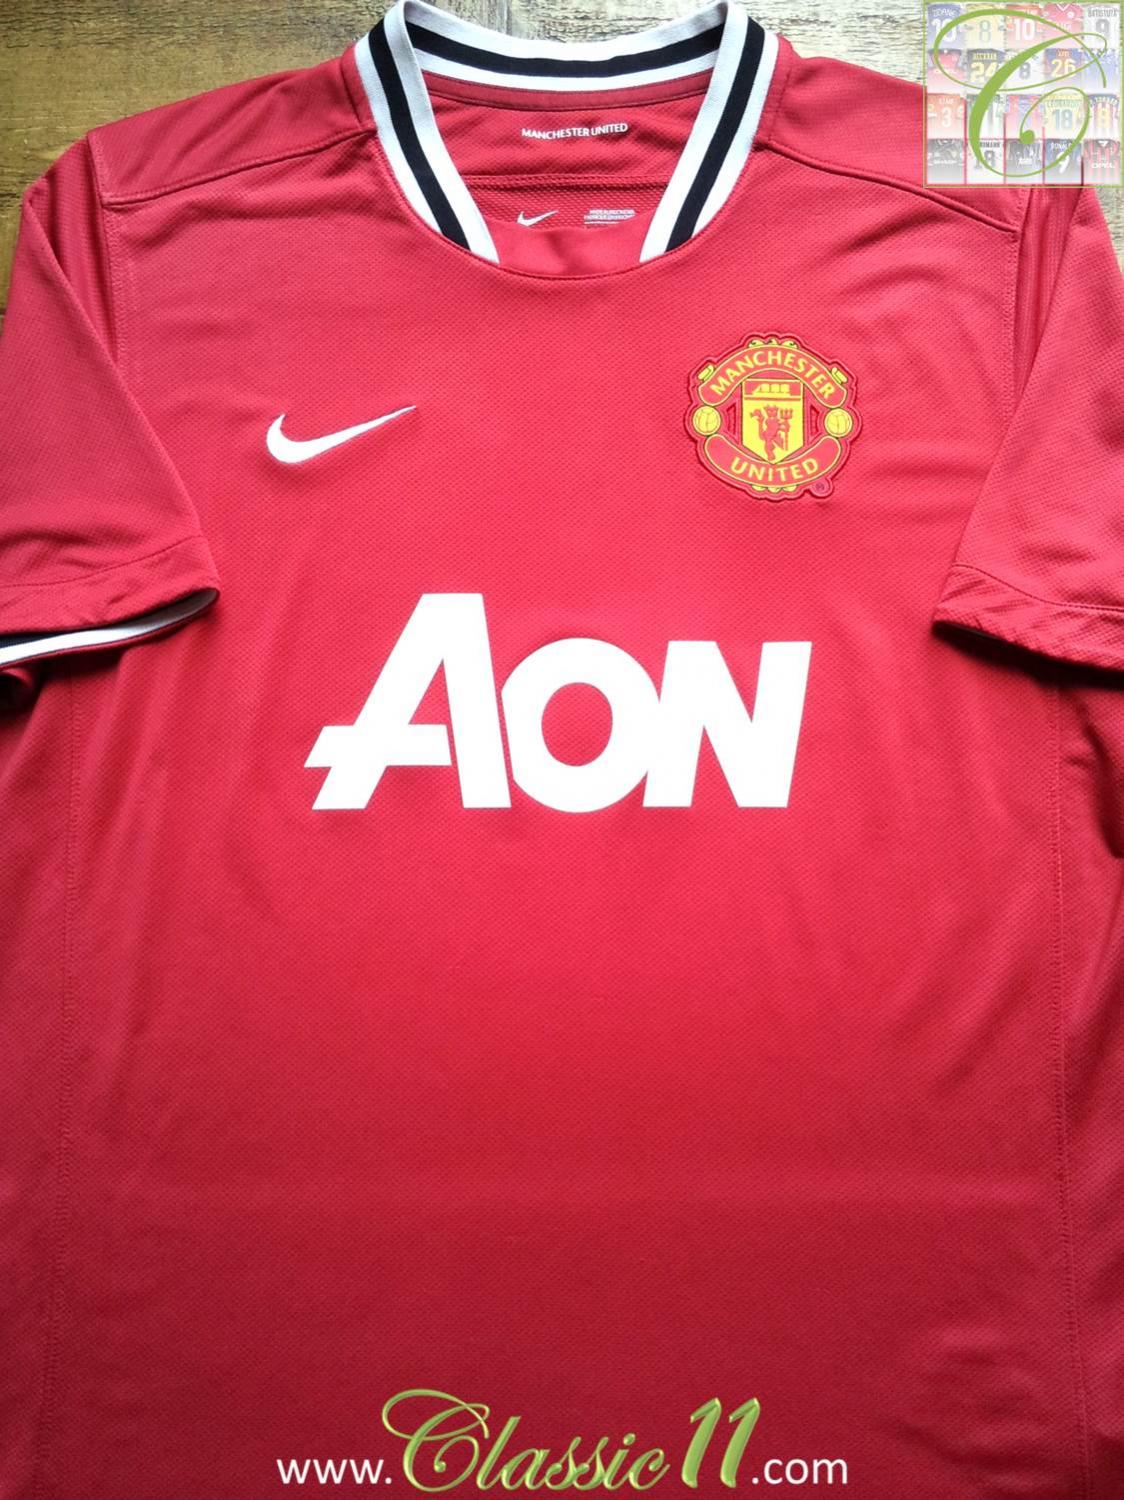 Manchester United Home football shirt 2011 - 2012. Sponsored by AON